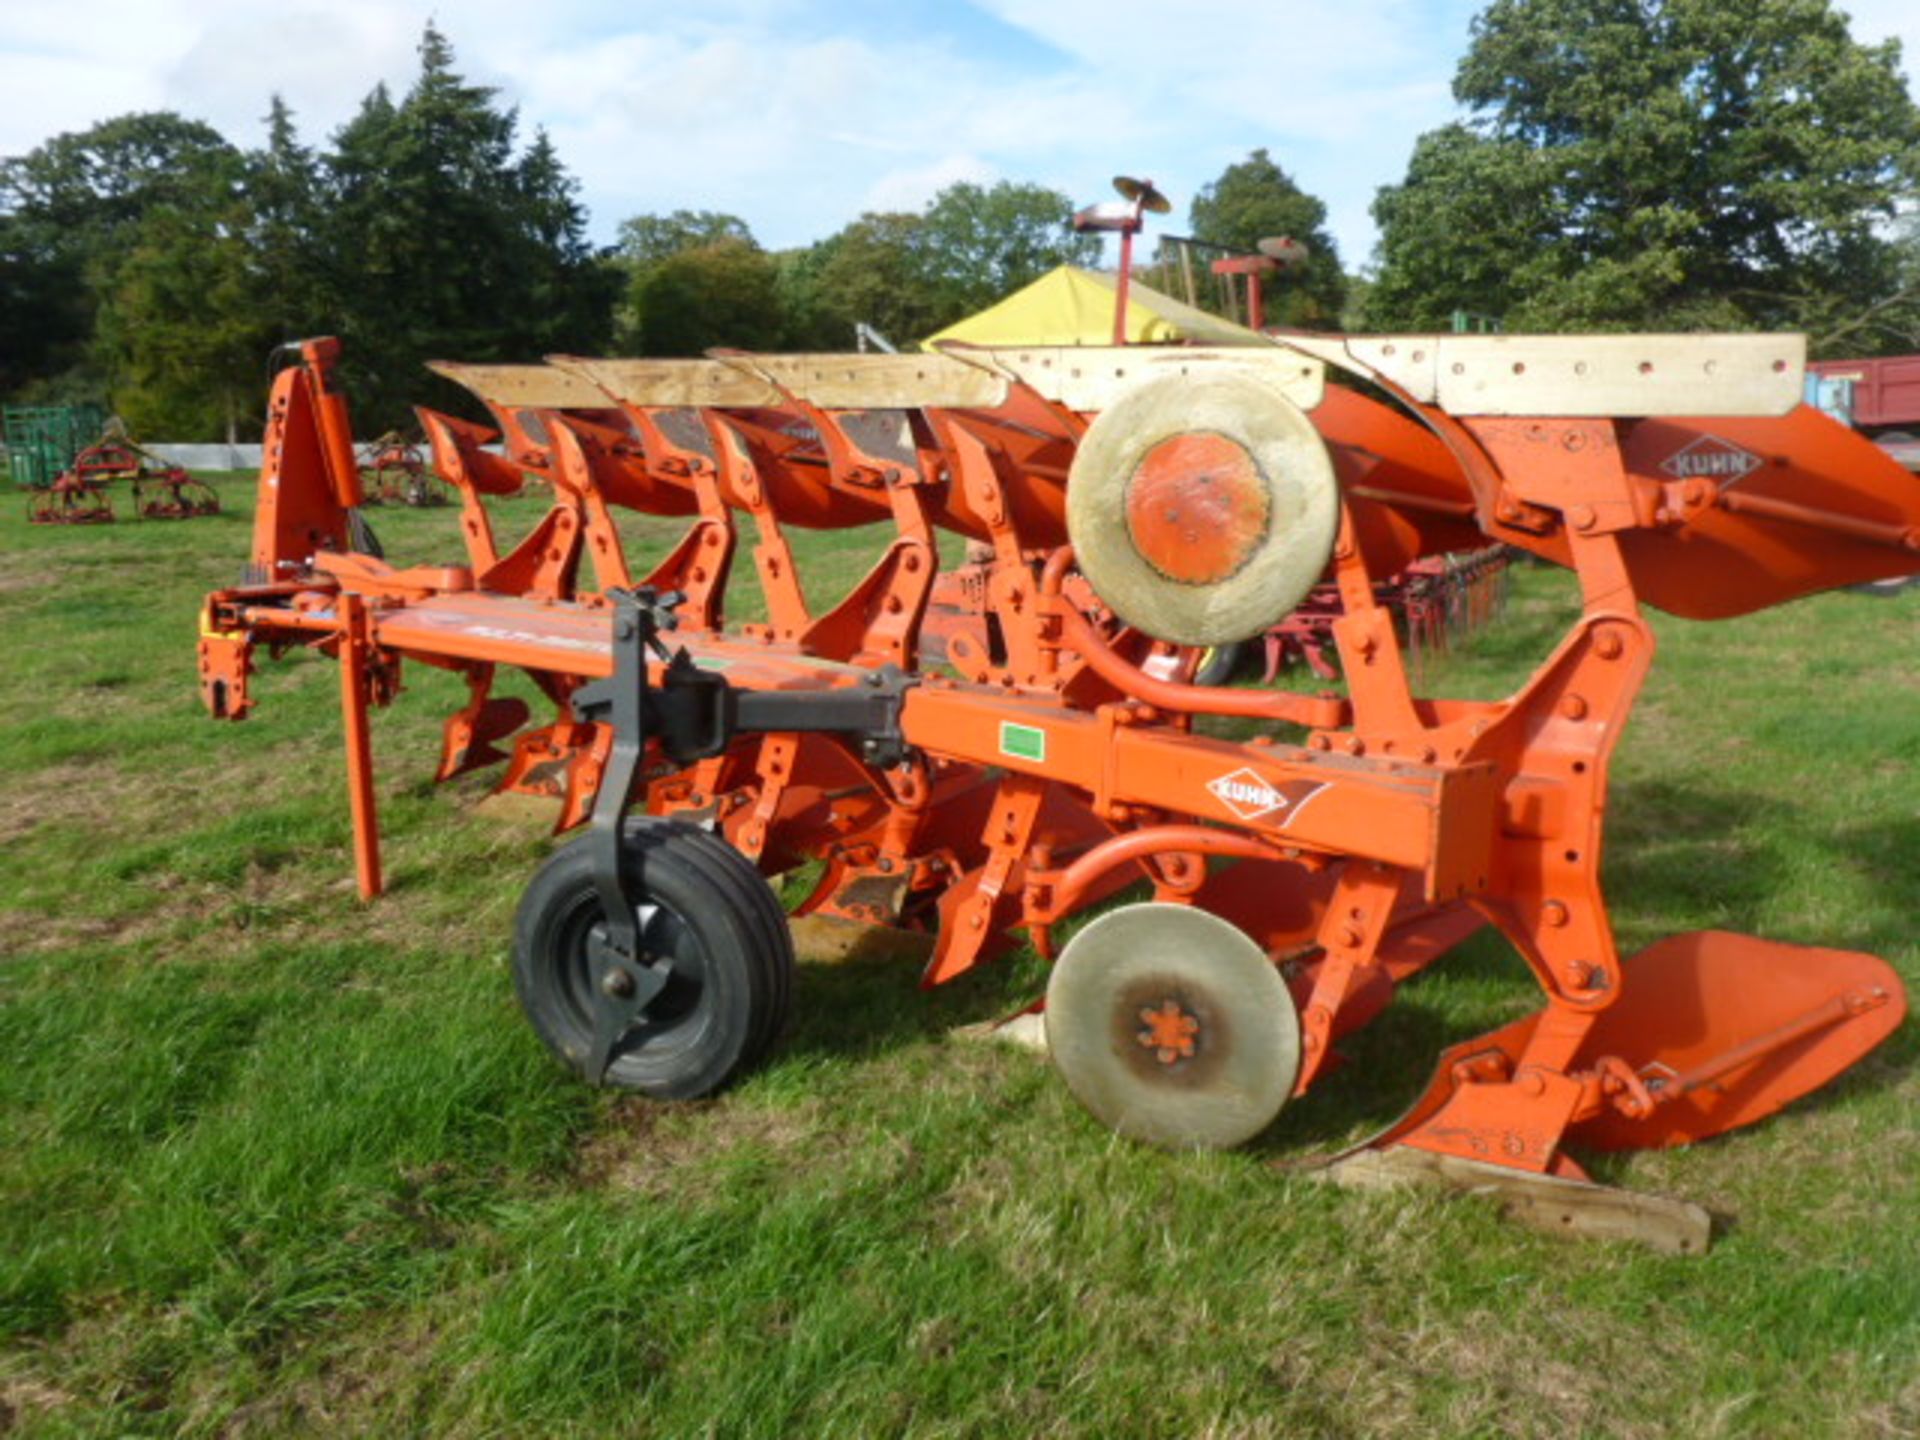 2012 Kuhn multi master 5 furrow plough, done approx. 500 acres - Image 2 of 4